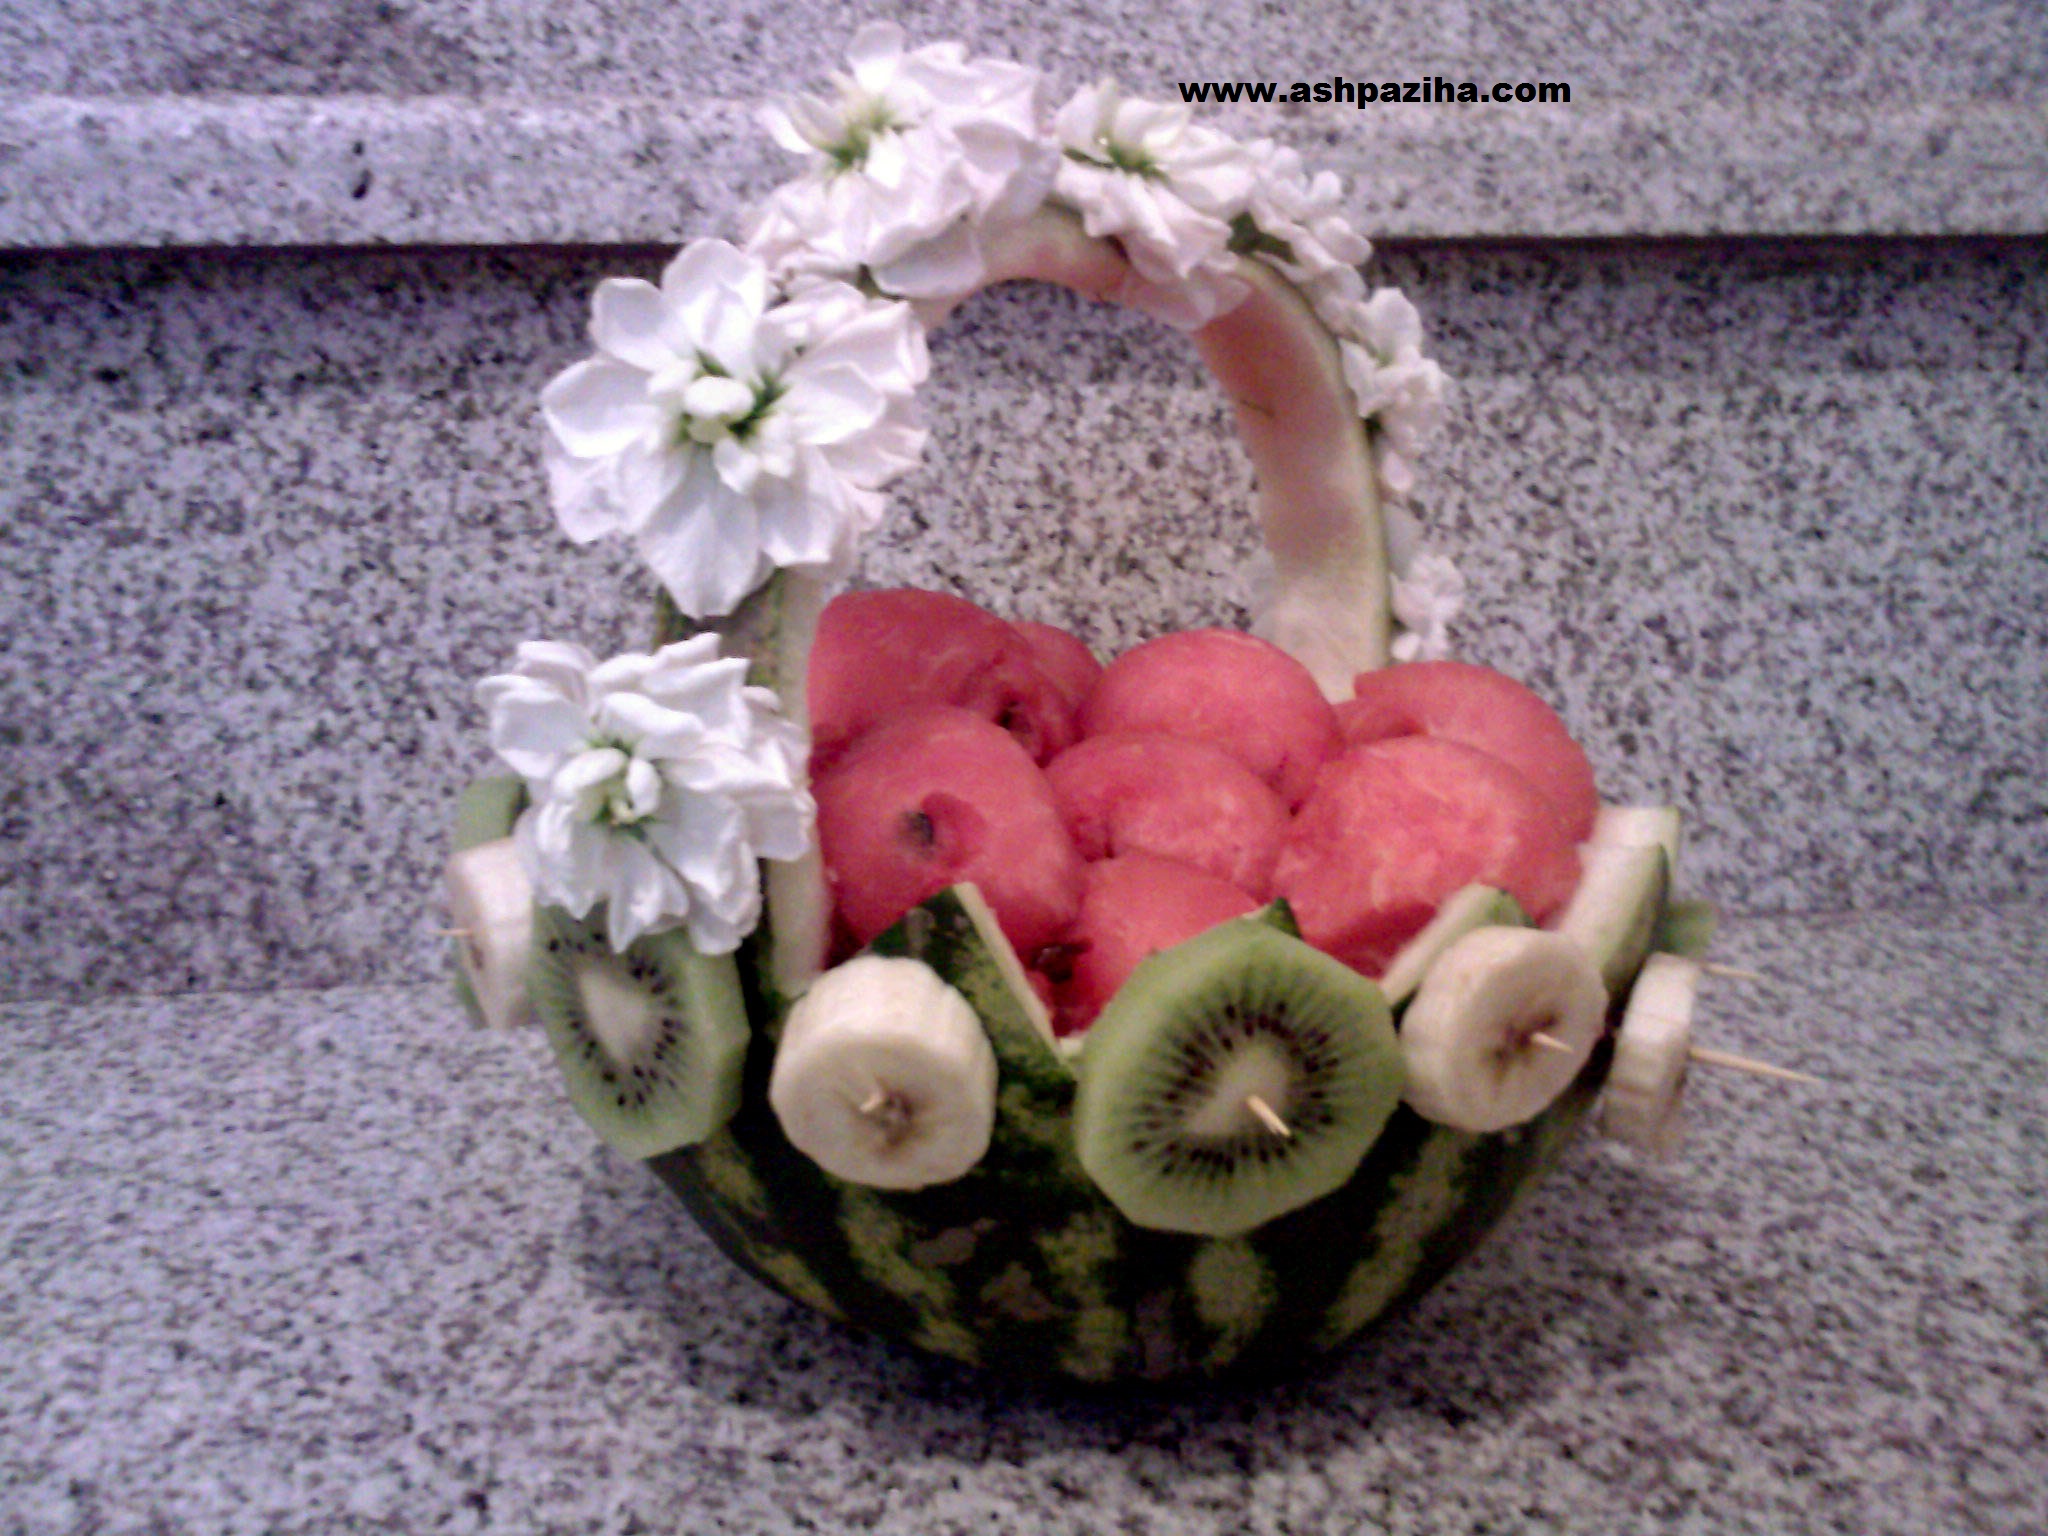 Types - decoration - Fruits - Nuts - night - Vancouver - Special - brides (27)